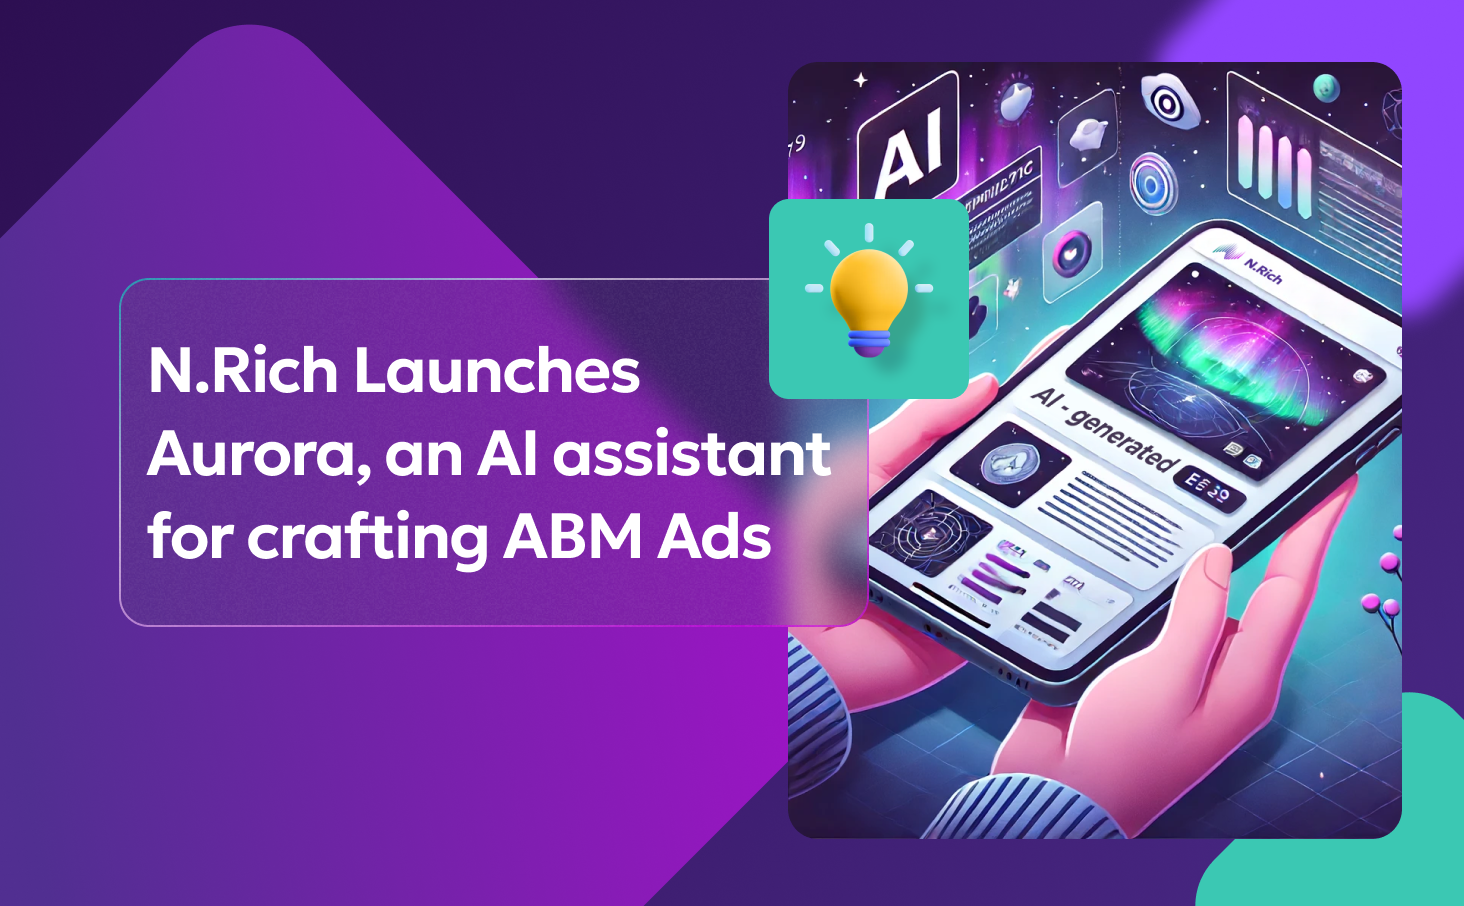 N.Rich Launches Aurora, an AI Ad assistant for crafting ABM Ads